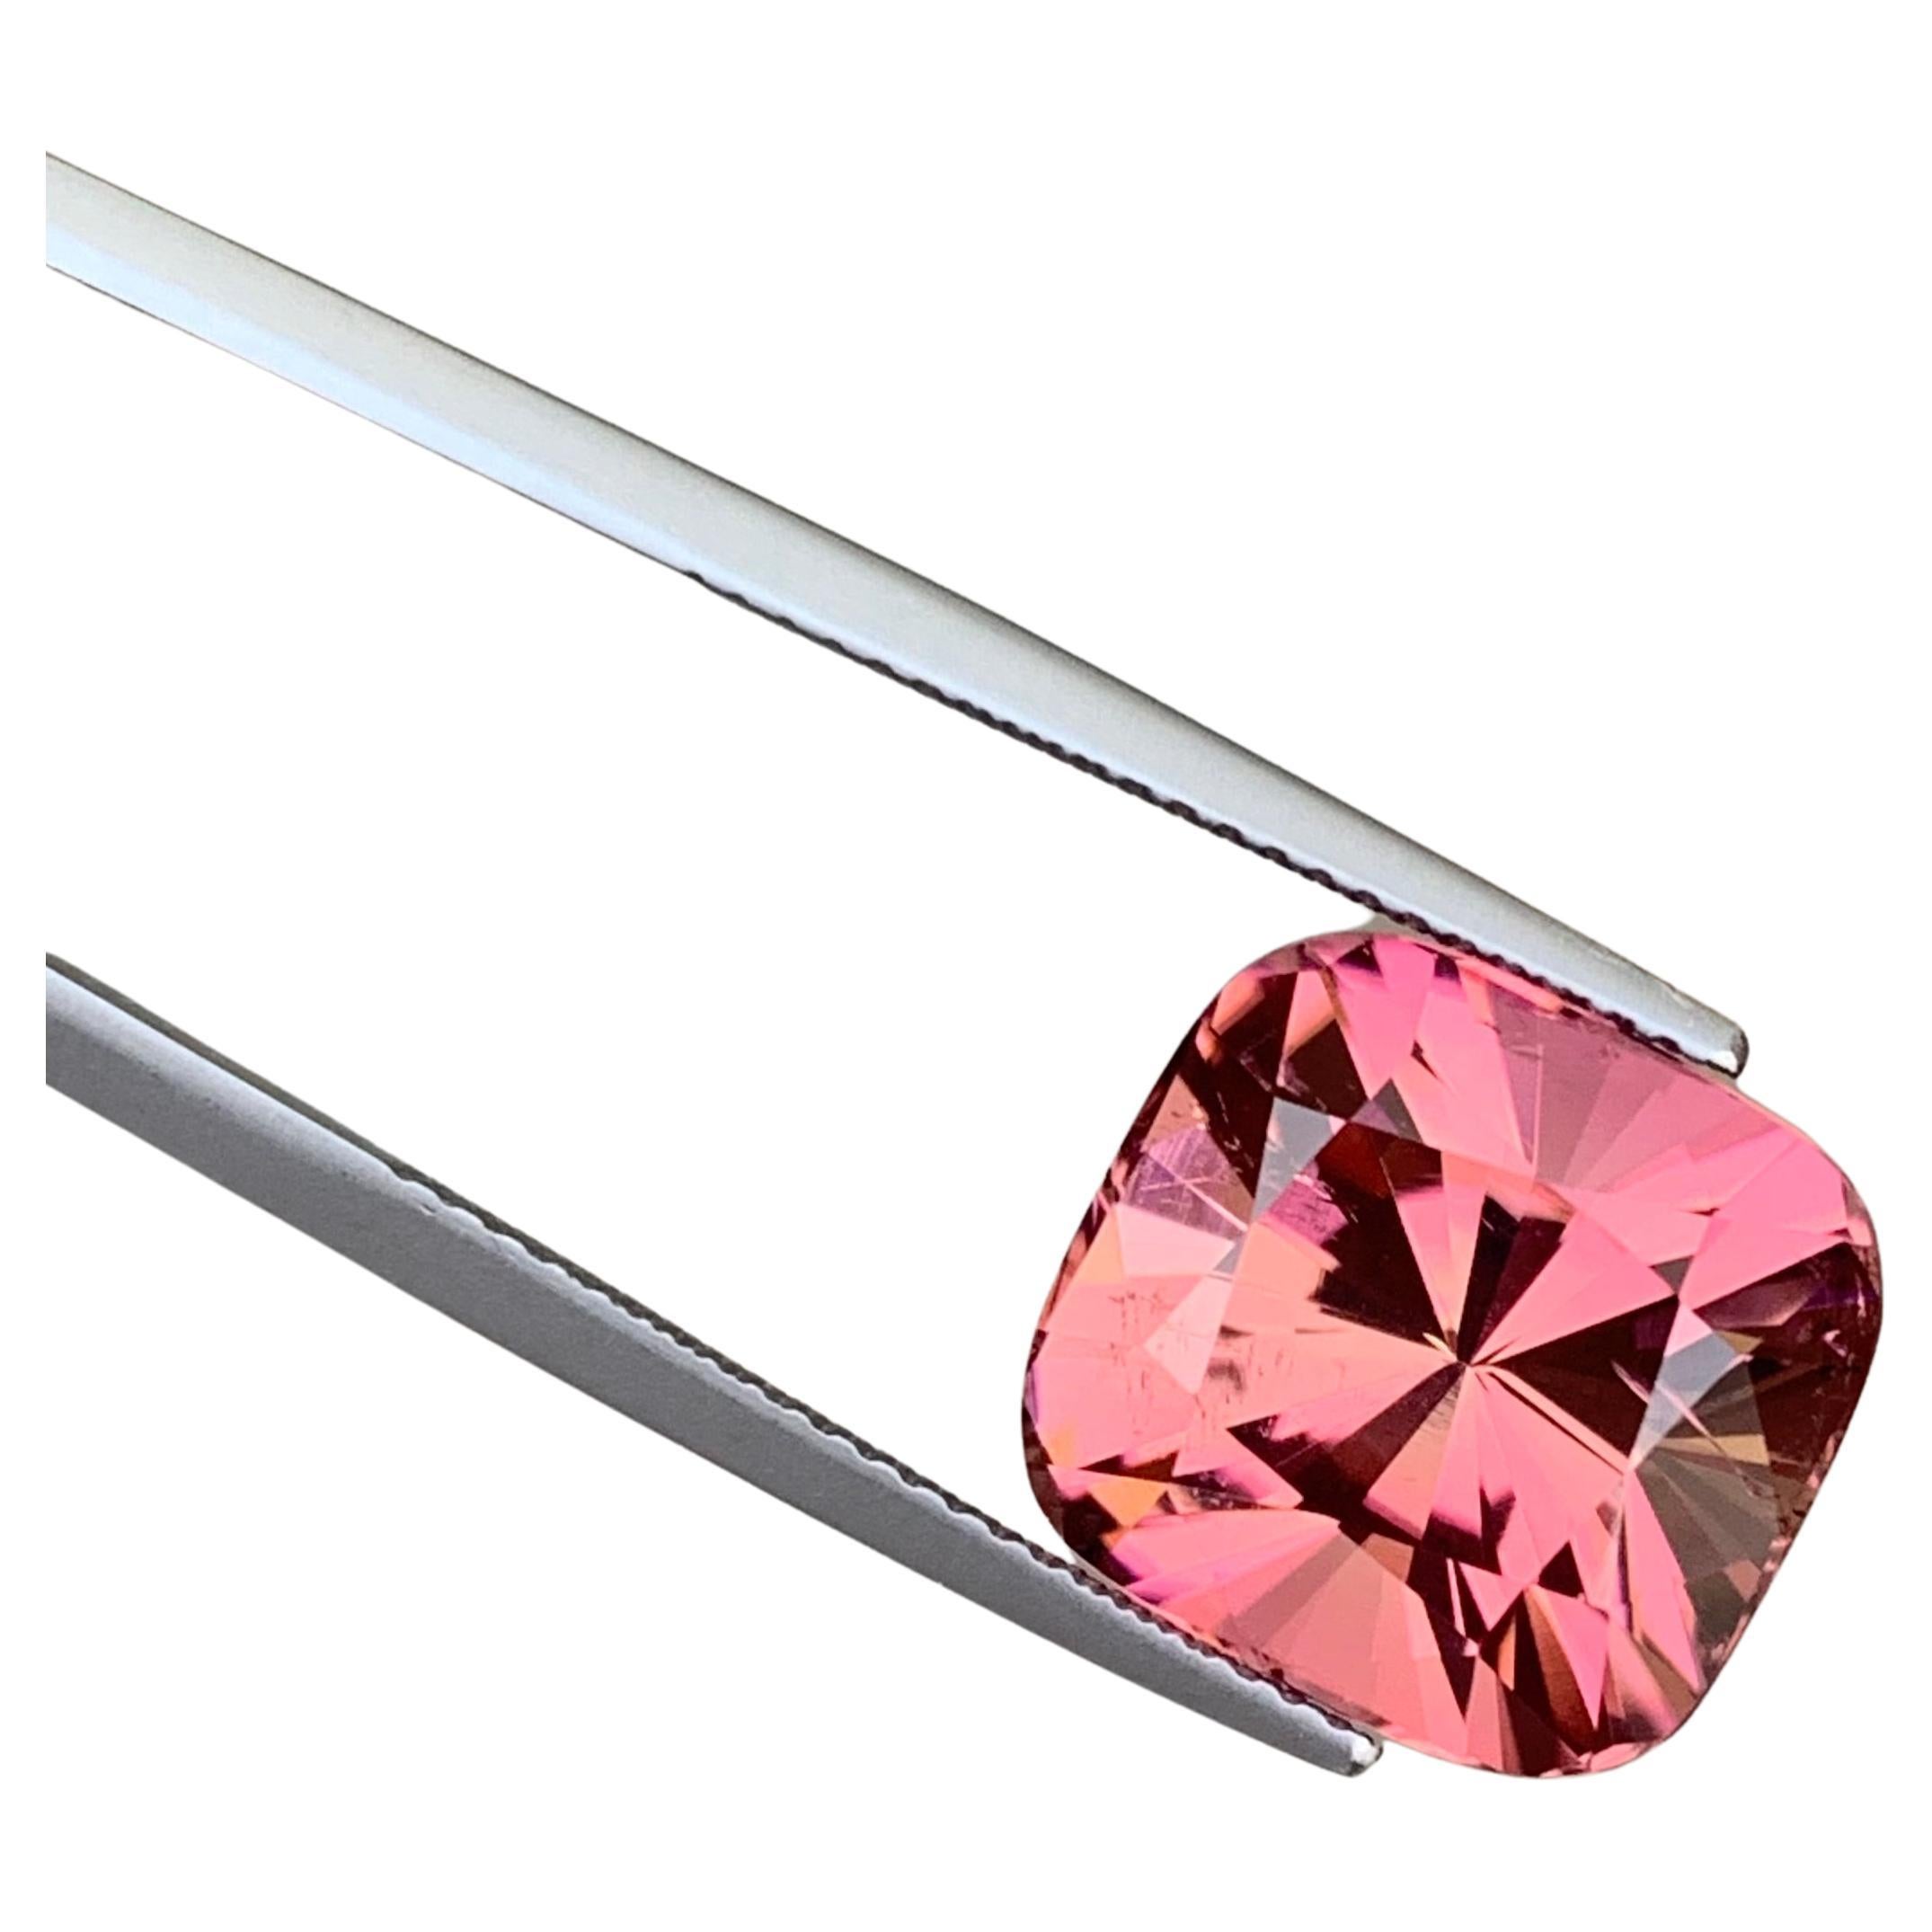 Faceted Tourmaline 
Weight: 11.55 Carats 
Dimension: 13.2x12.4x10.4 Mm
Origin: Afghanistan 
Color:  Pink
Shape: Cushion
Clarity: Eye Clean
Certificate: On Demand 
With a rating between 7 and 7.5 on the Mohs scale of mineral hardness, tourmaline